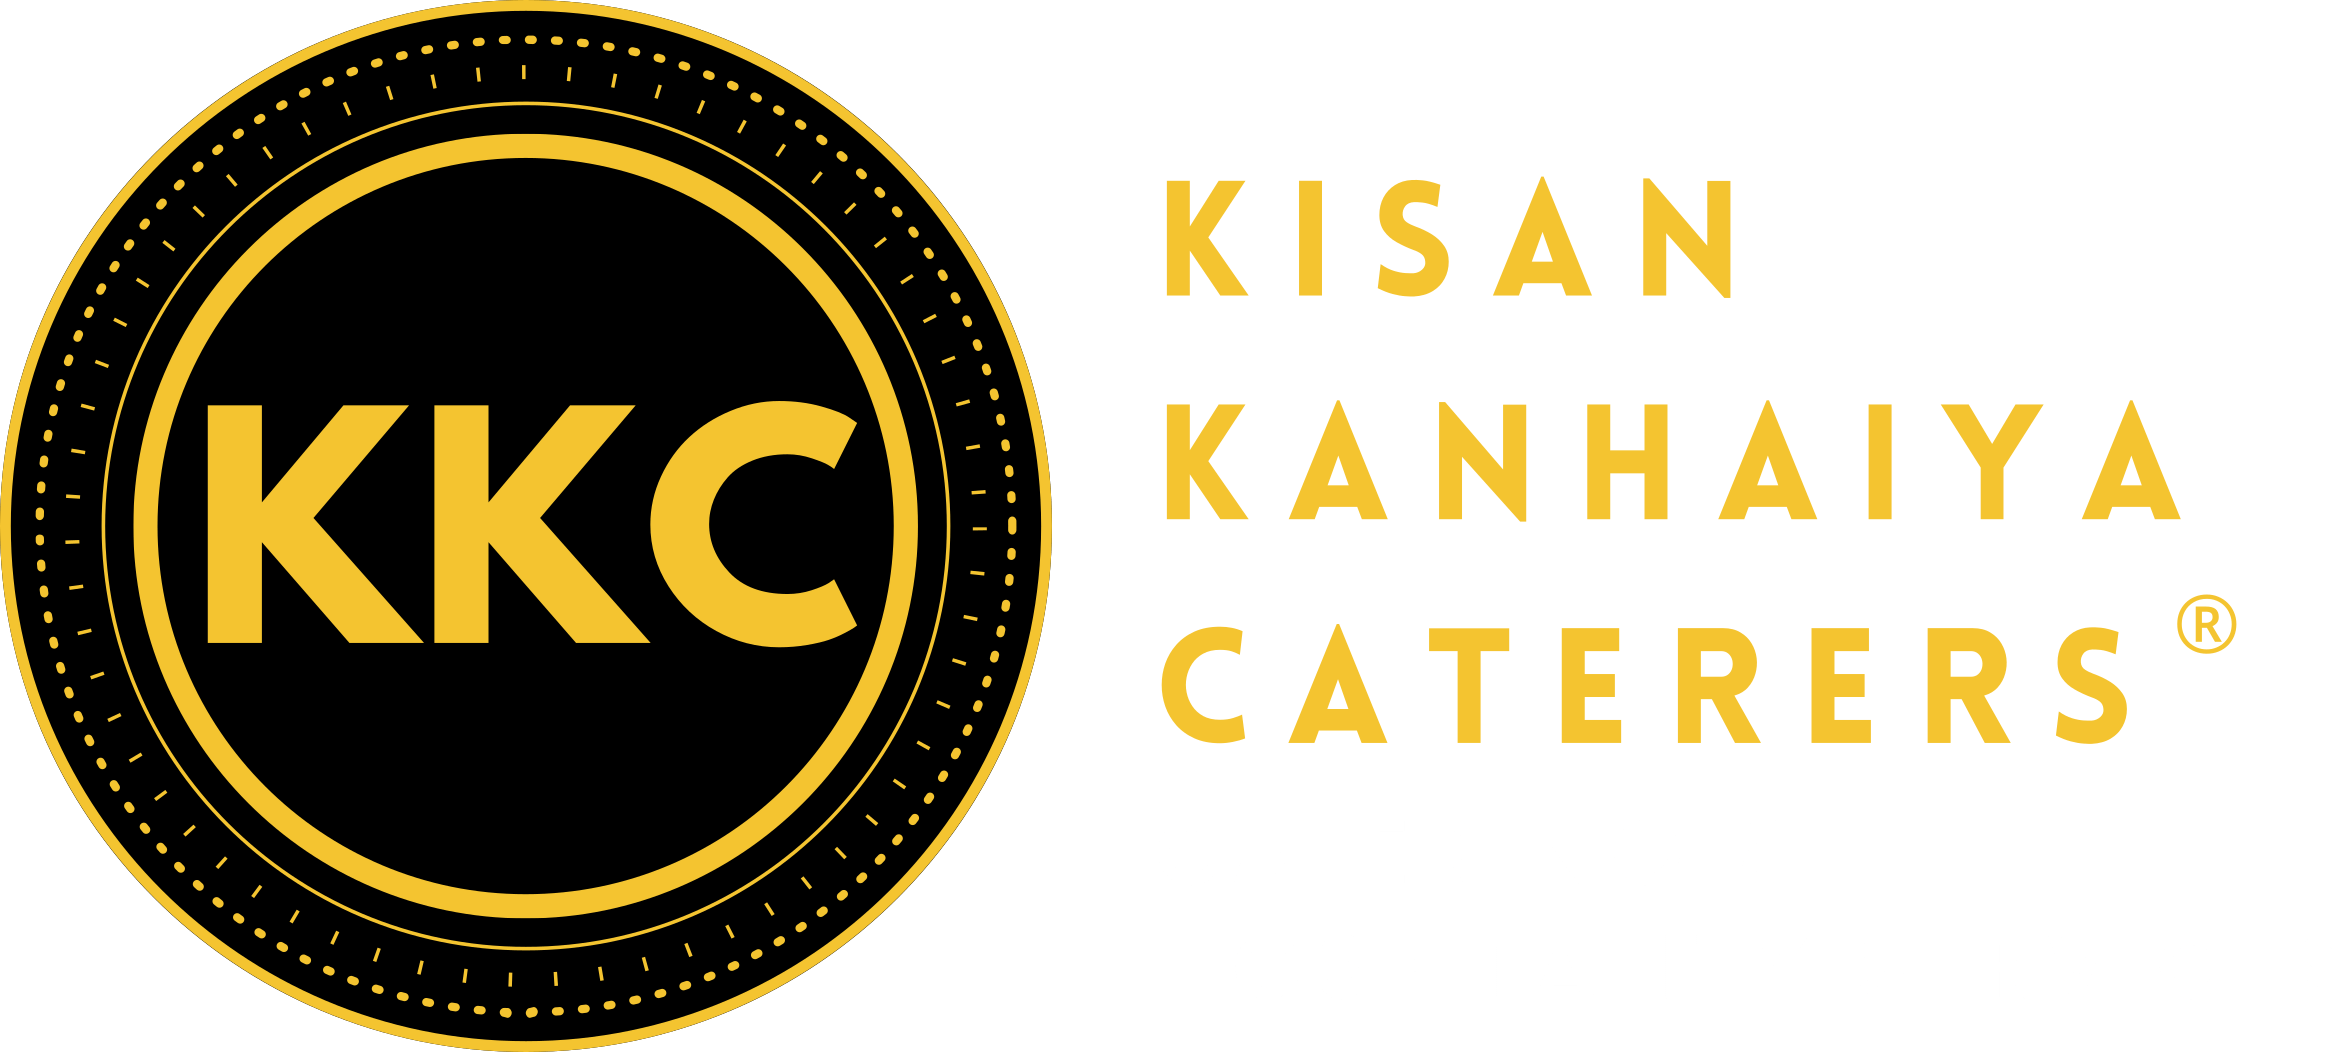 logo Kisan Kanhaiya Caterers - Wedding Caterer in Lucknow | Catering Services in Lucknow